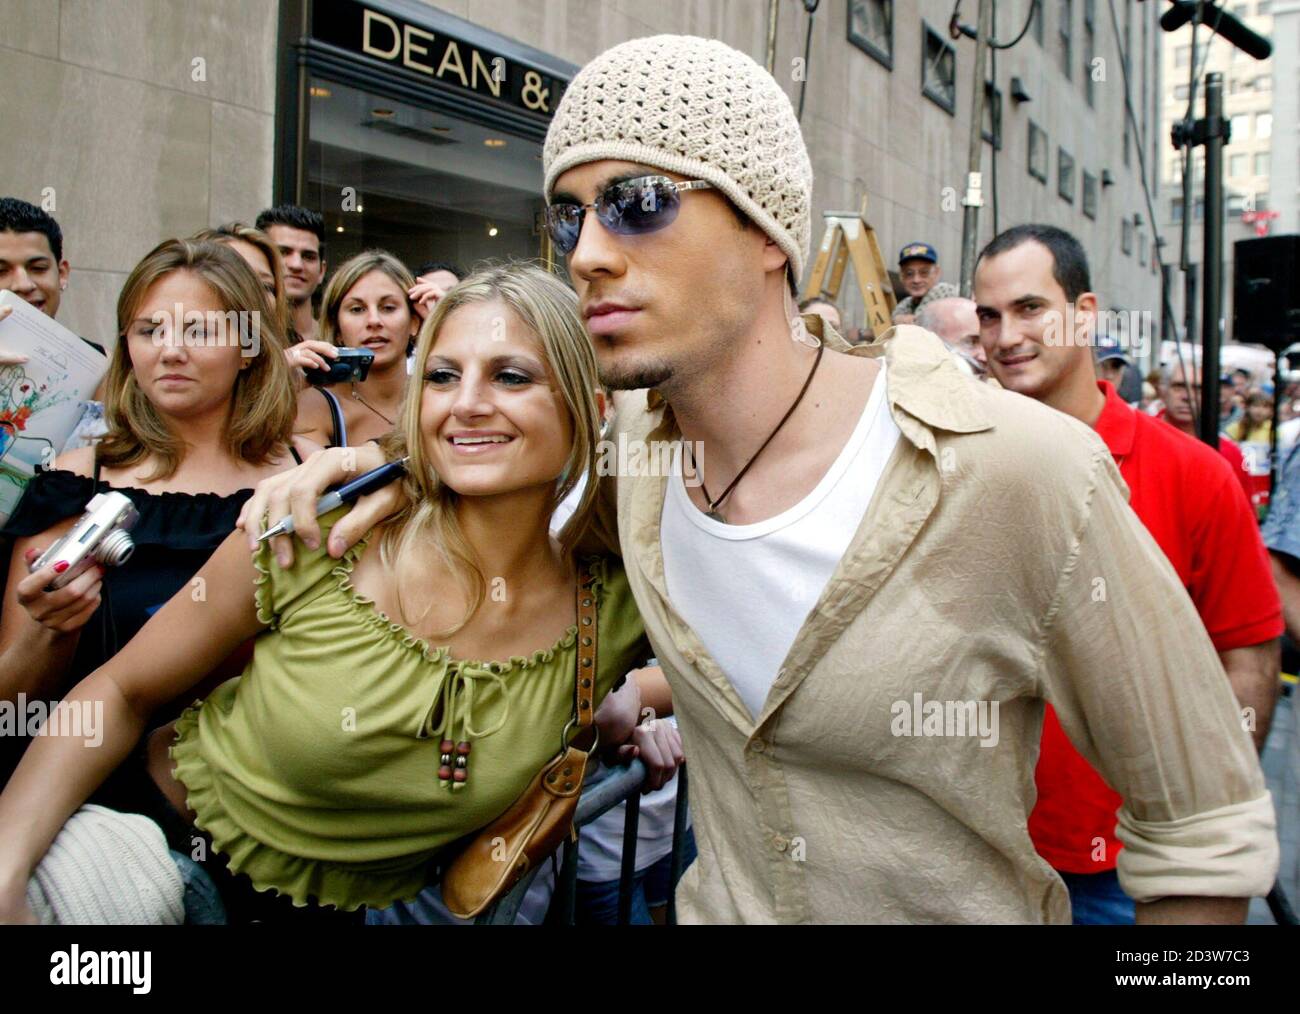 Enrique Iglesias R High Resolution Stock Photography and Images - Alamy